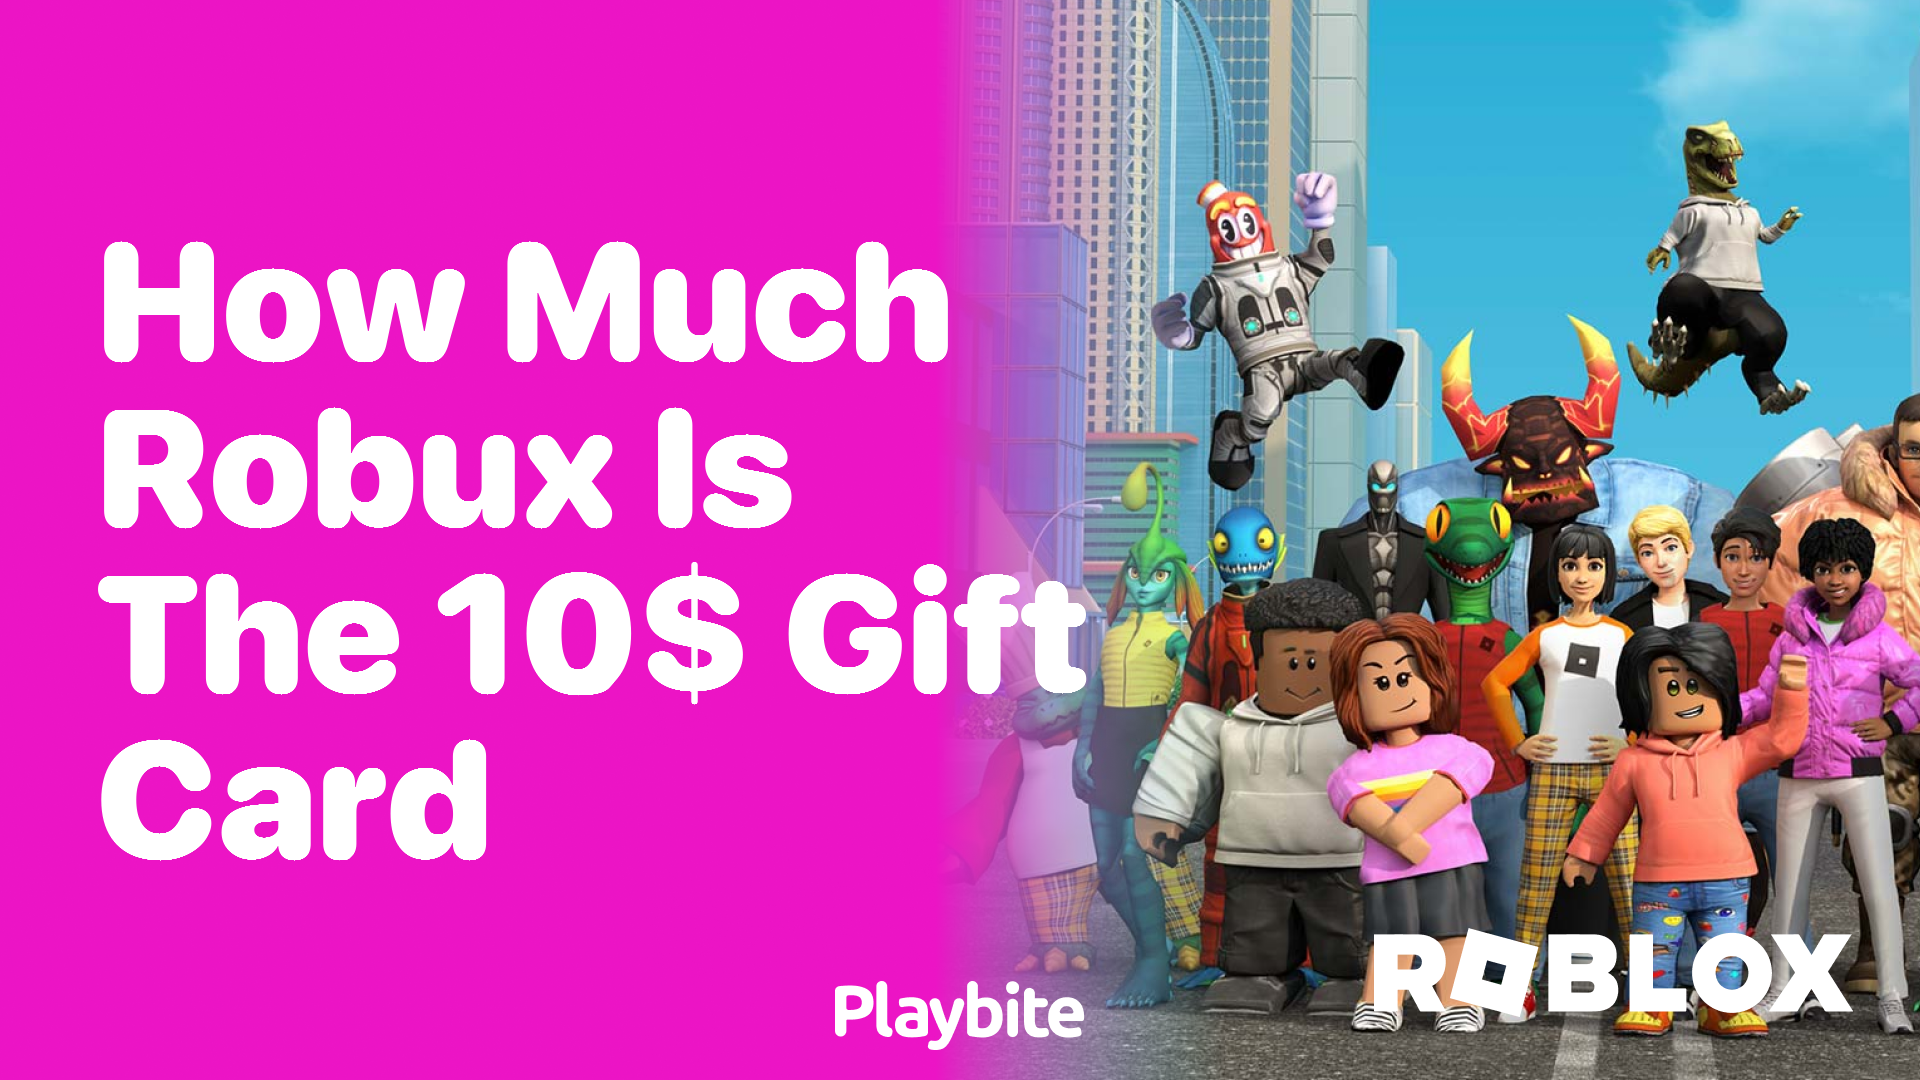 How Much Robux Can You Get With a $10 Gift Card?